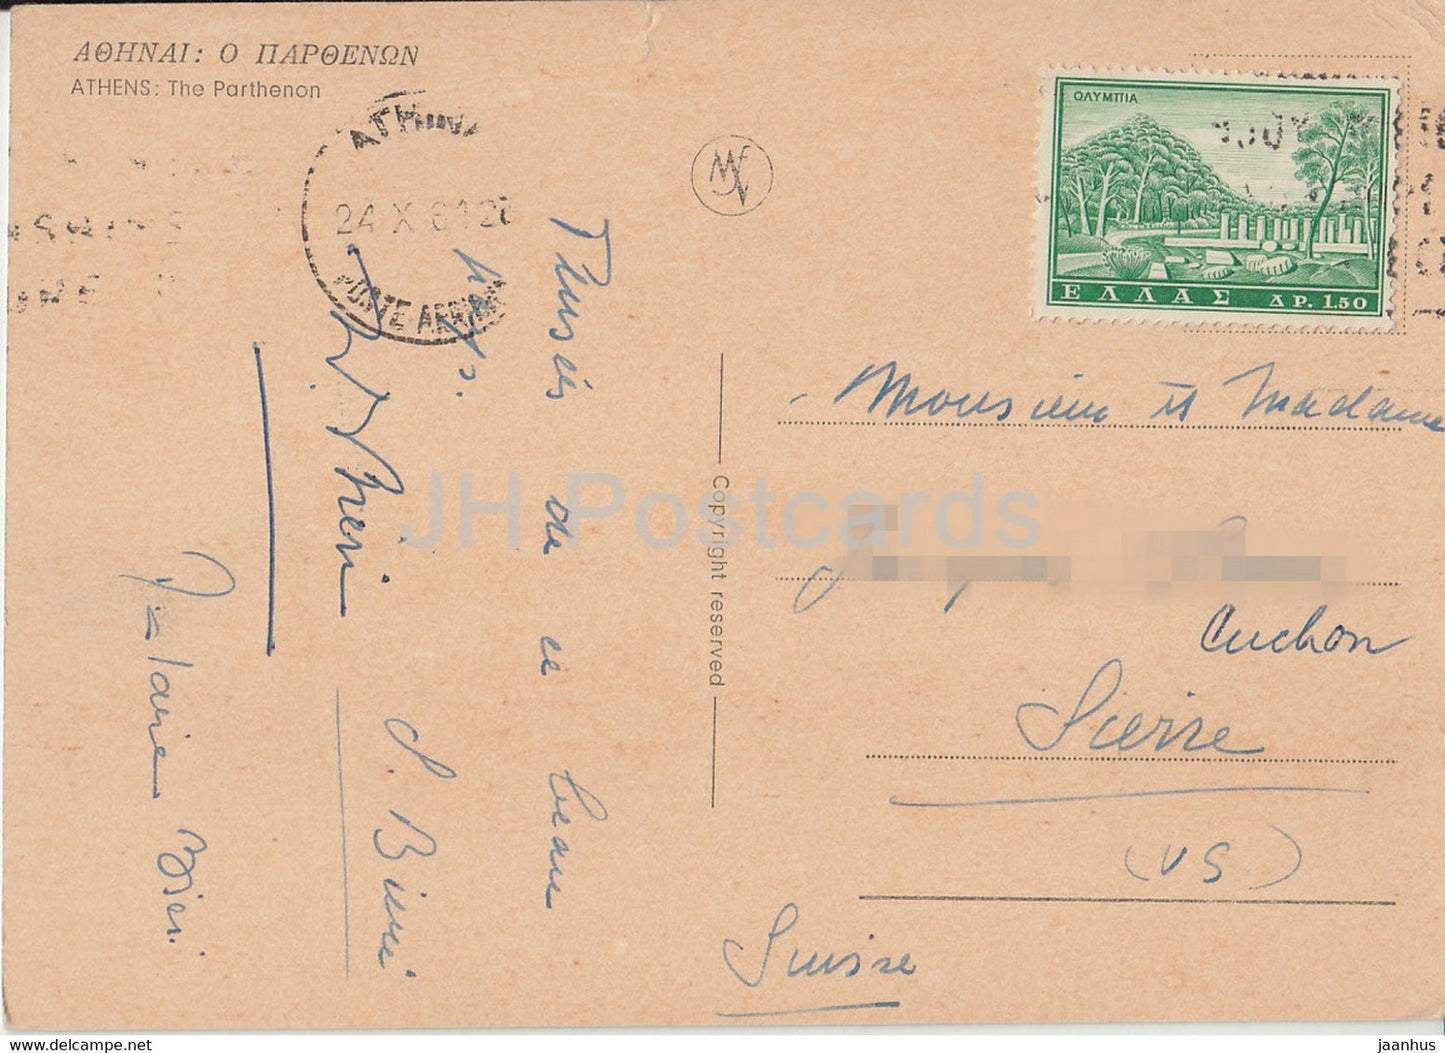 Athens - Parthenon - Ancient Greece - 1961 - Greece - used